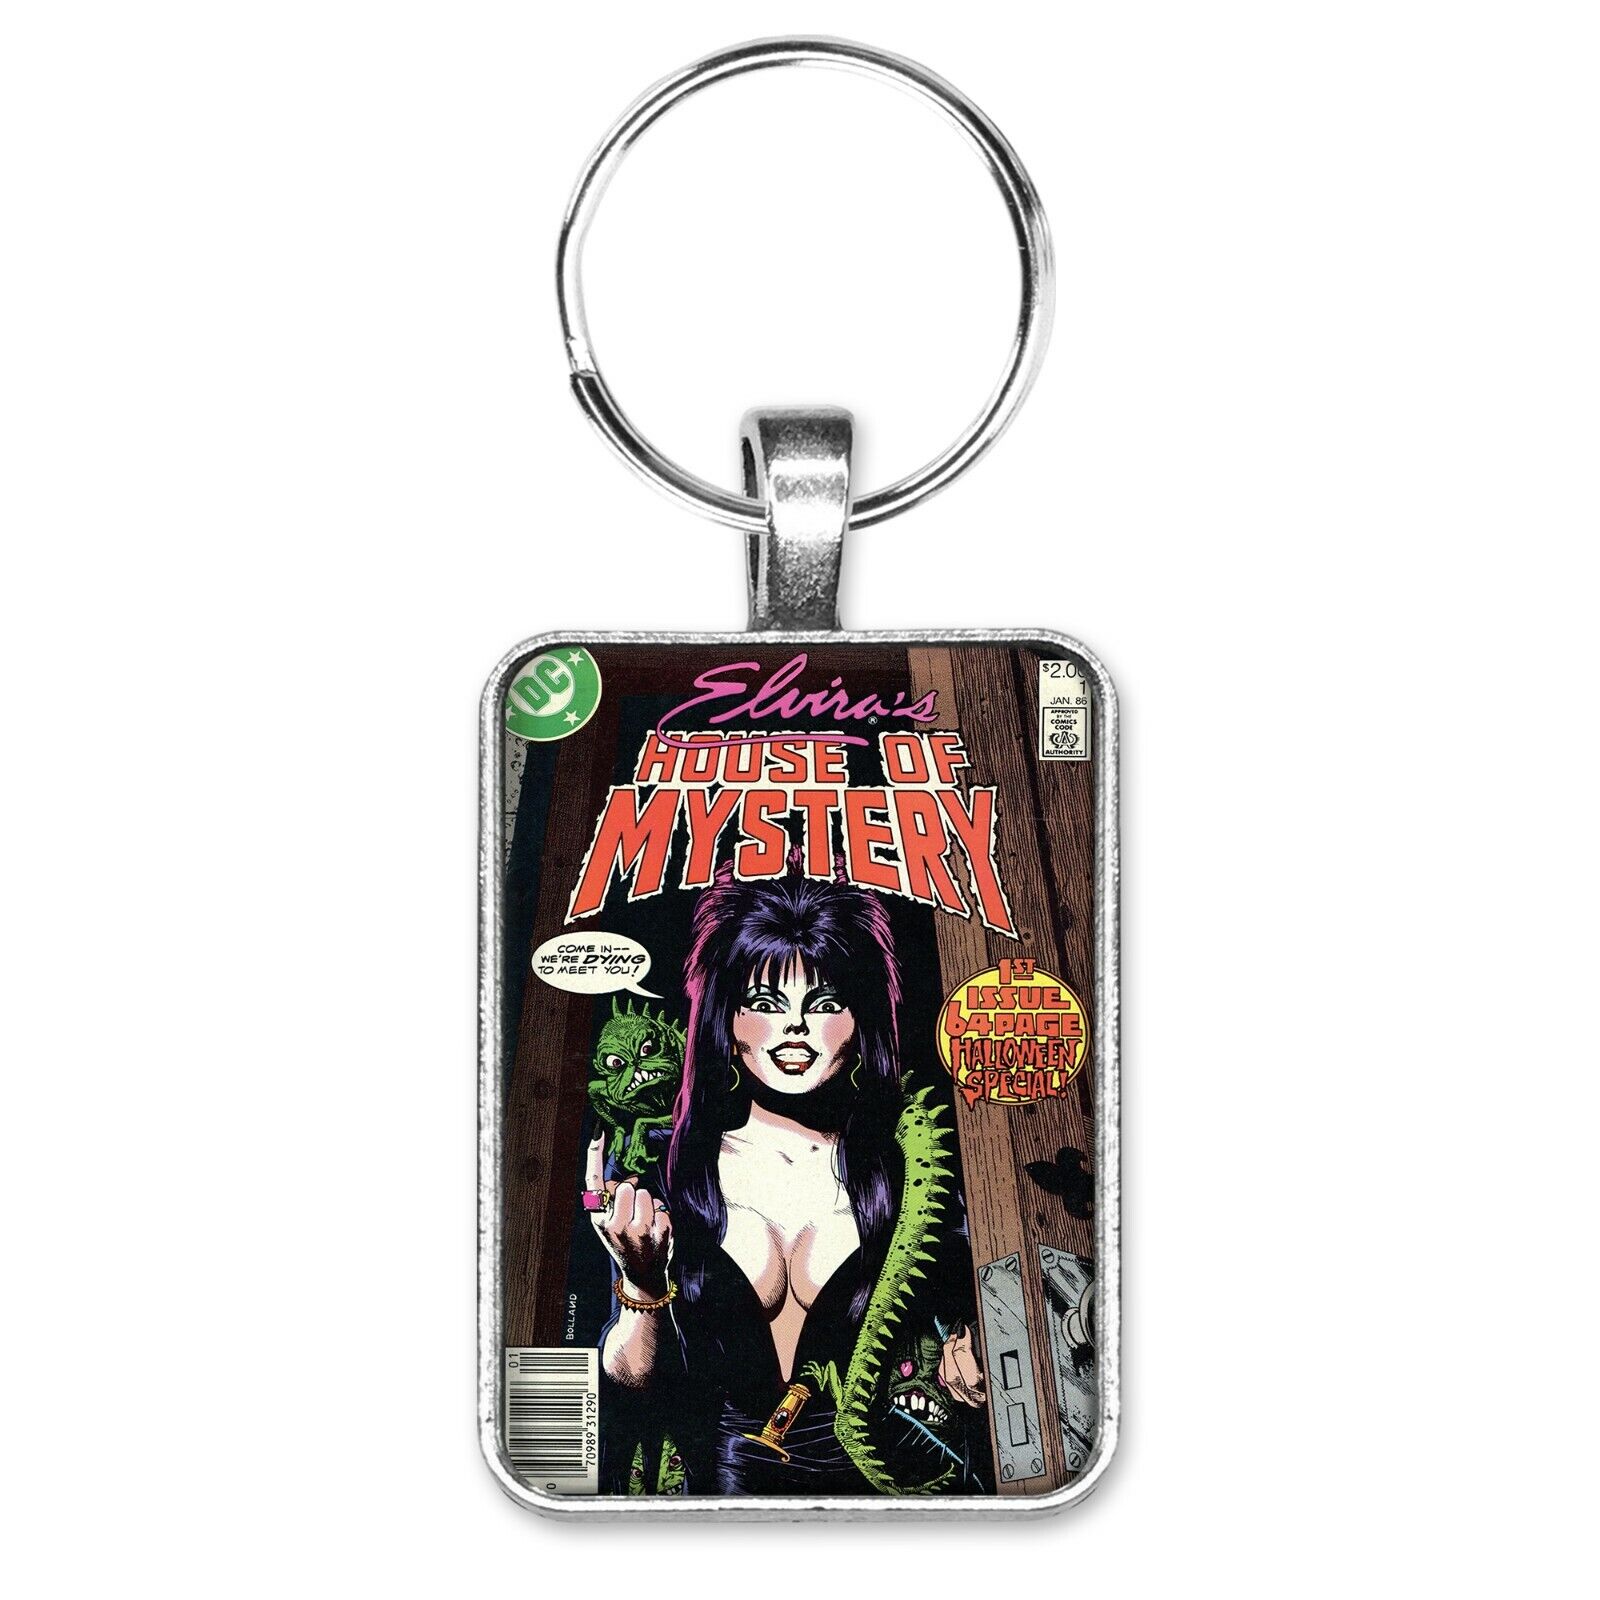 Elvira's House Of Mystery #1 Cover Key Ring / Necklace Horror Comic Book Jewelry